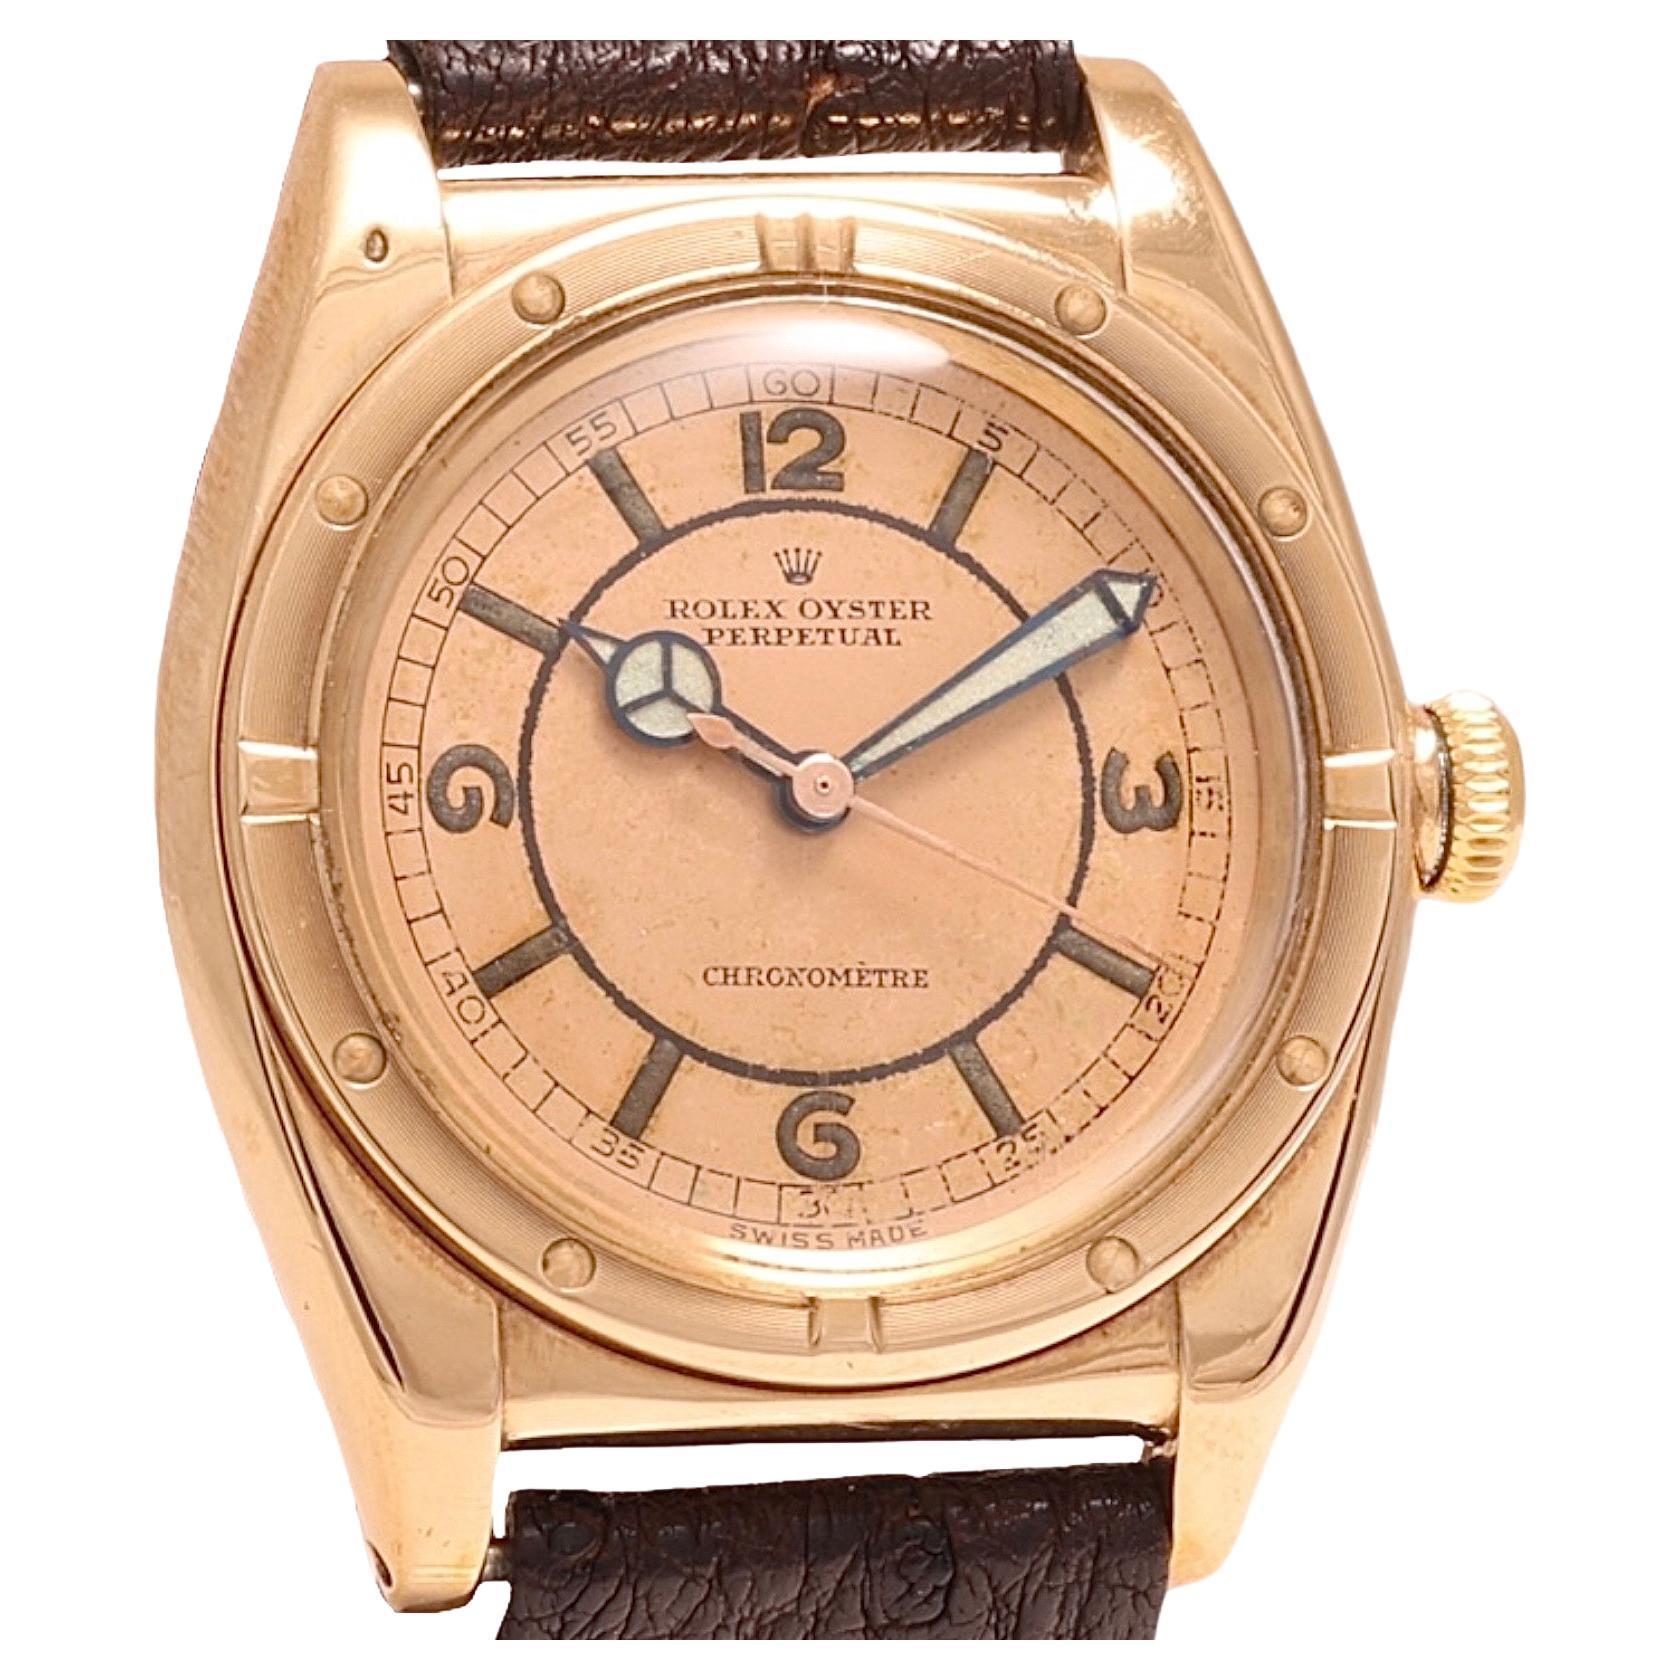 Pink Gold & Stainless Steel Rolex Chronometre Bubble Back Automatic Wrist Watch